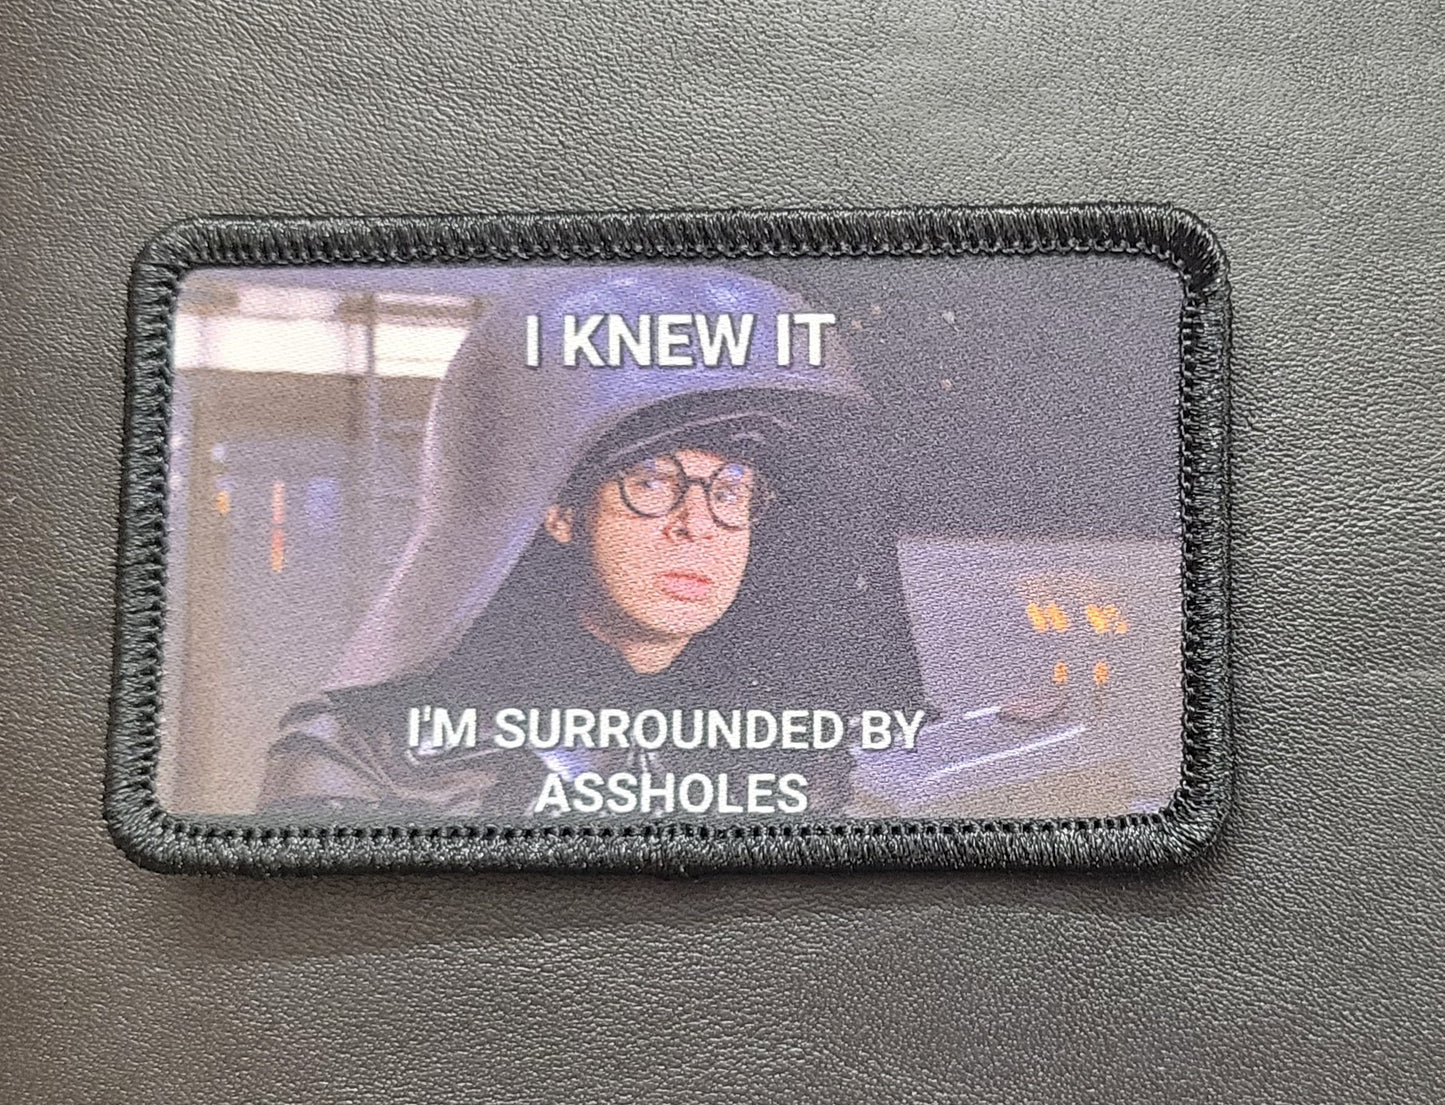 I Knew It, I'm Surrounded By Assholes! Spaceballs Inspired Patch